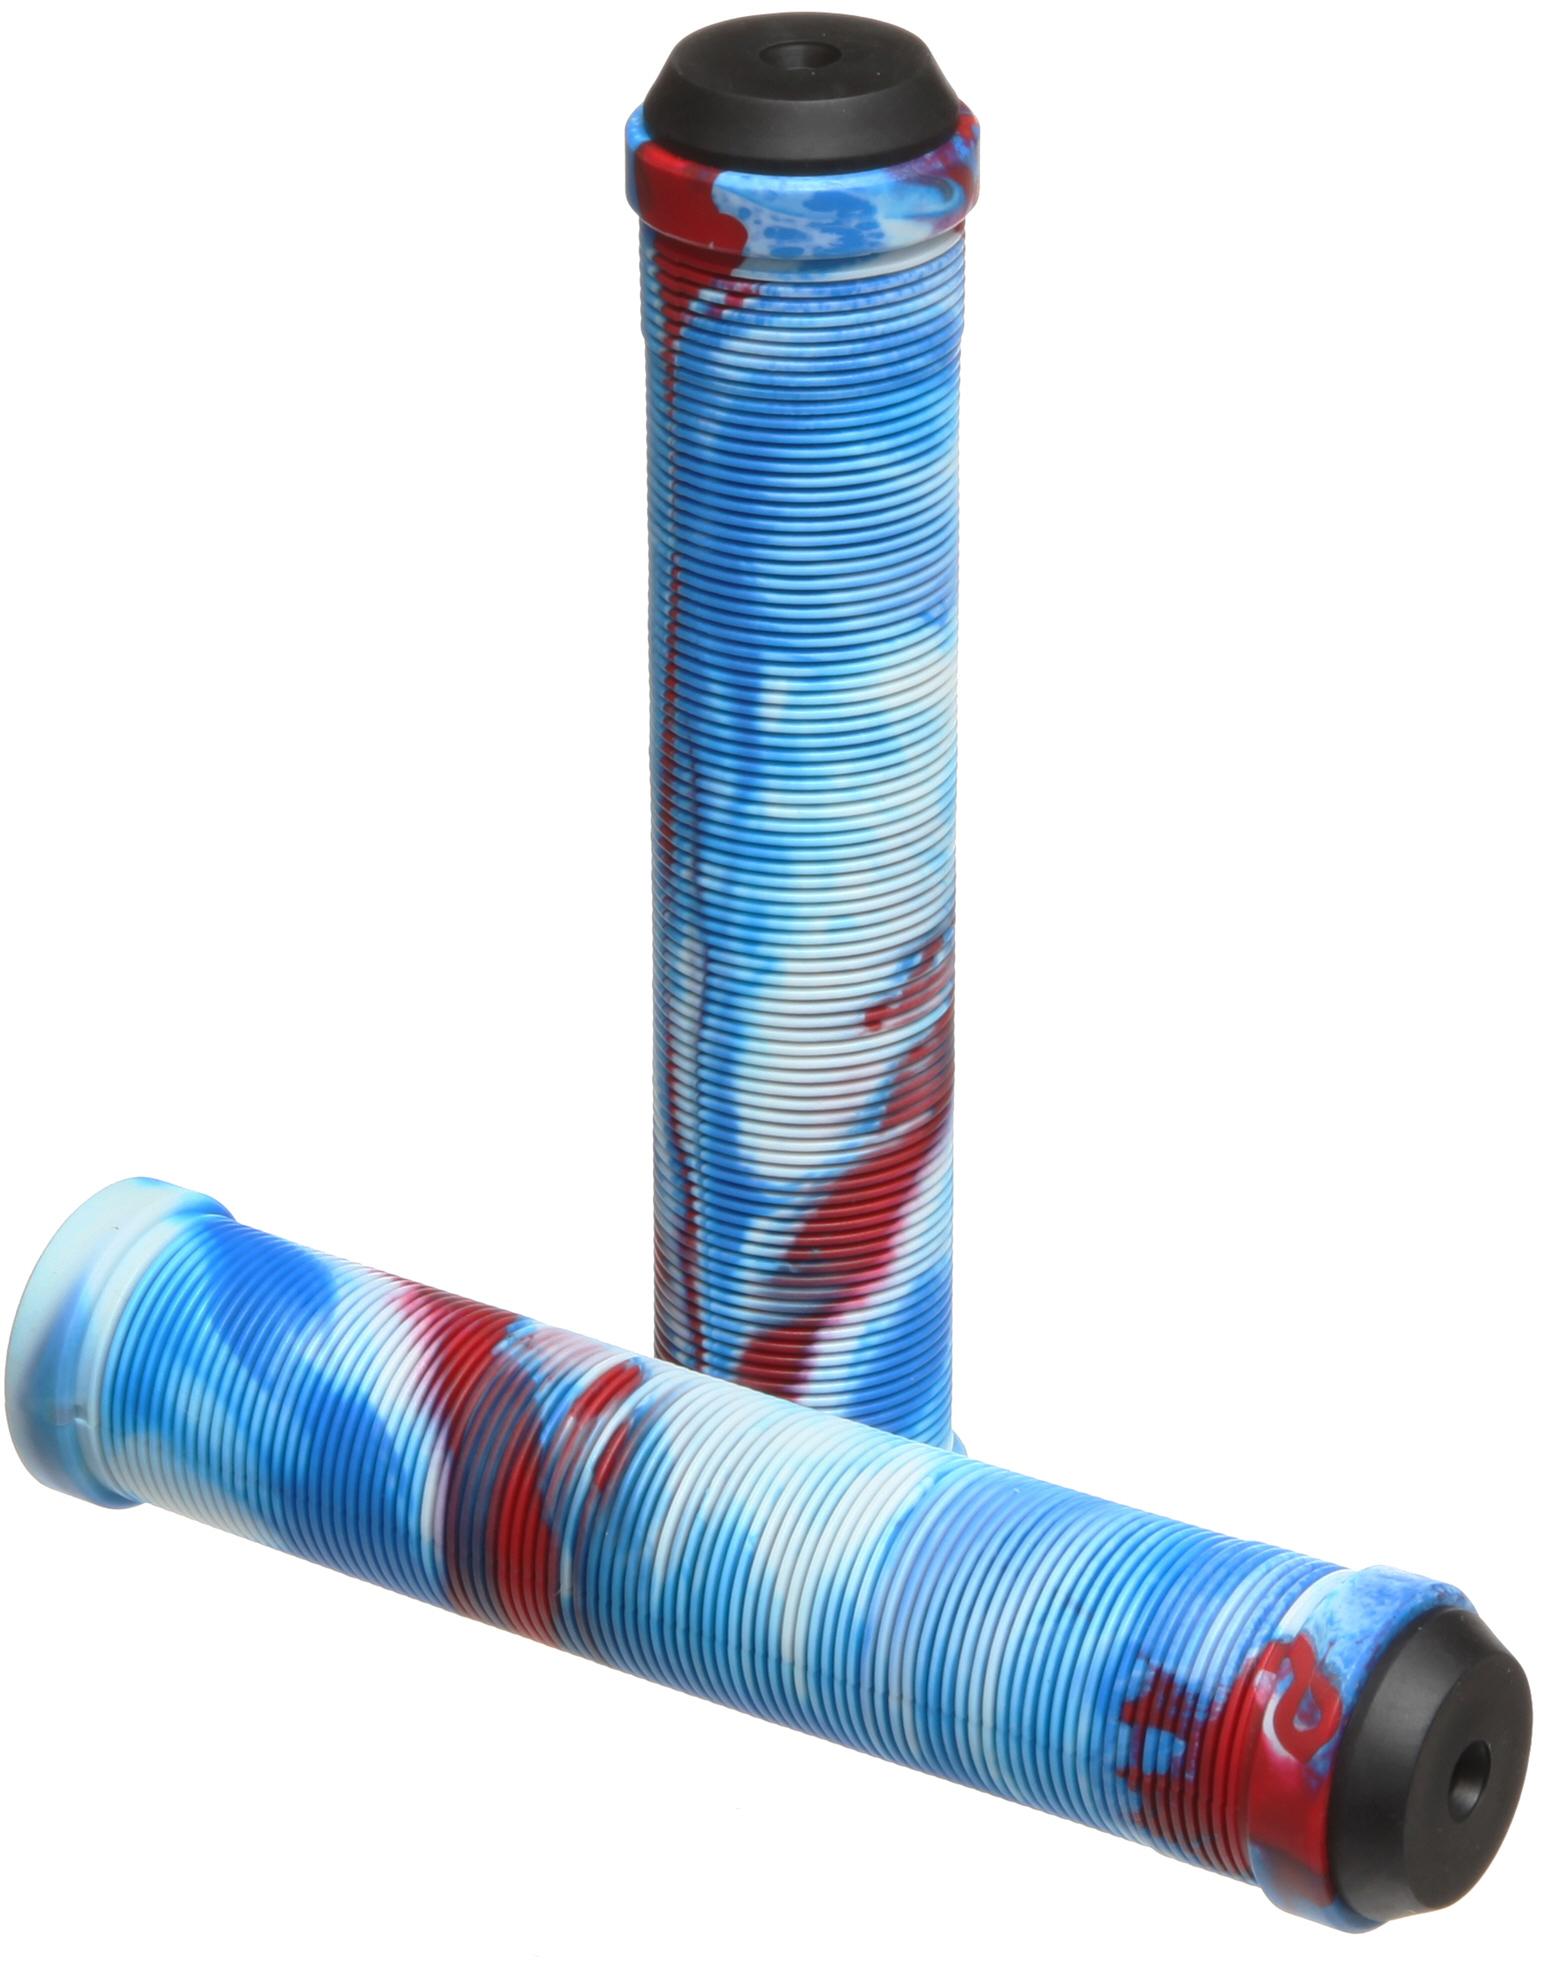 Seal Bmx Switch Grips - Limited Edition - Patriot